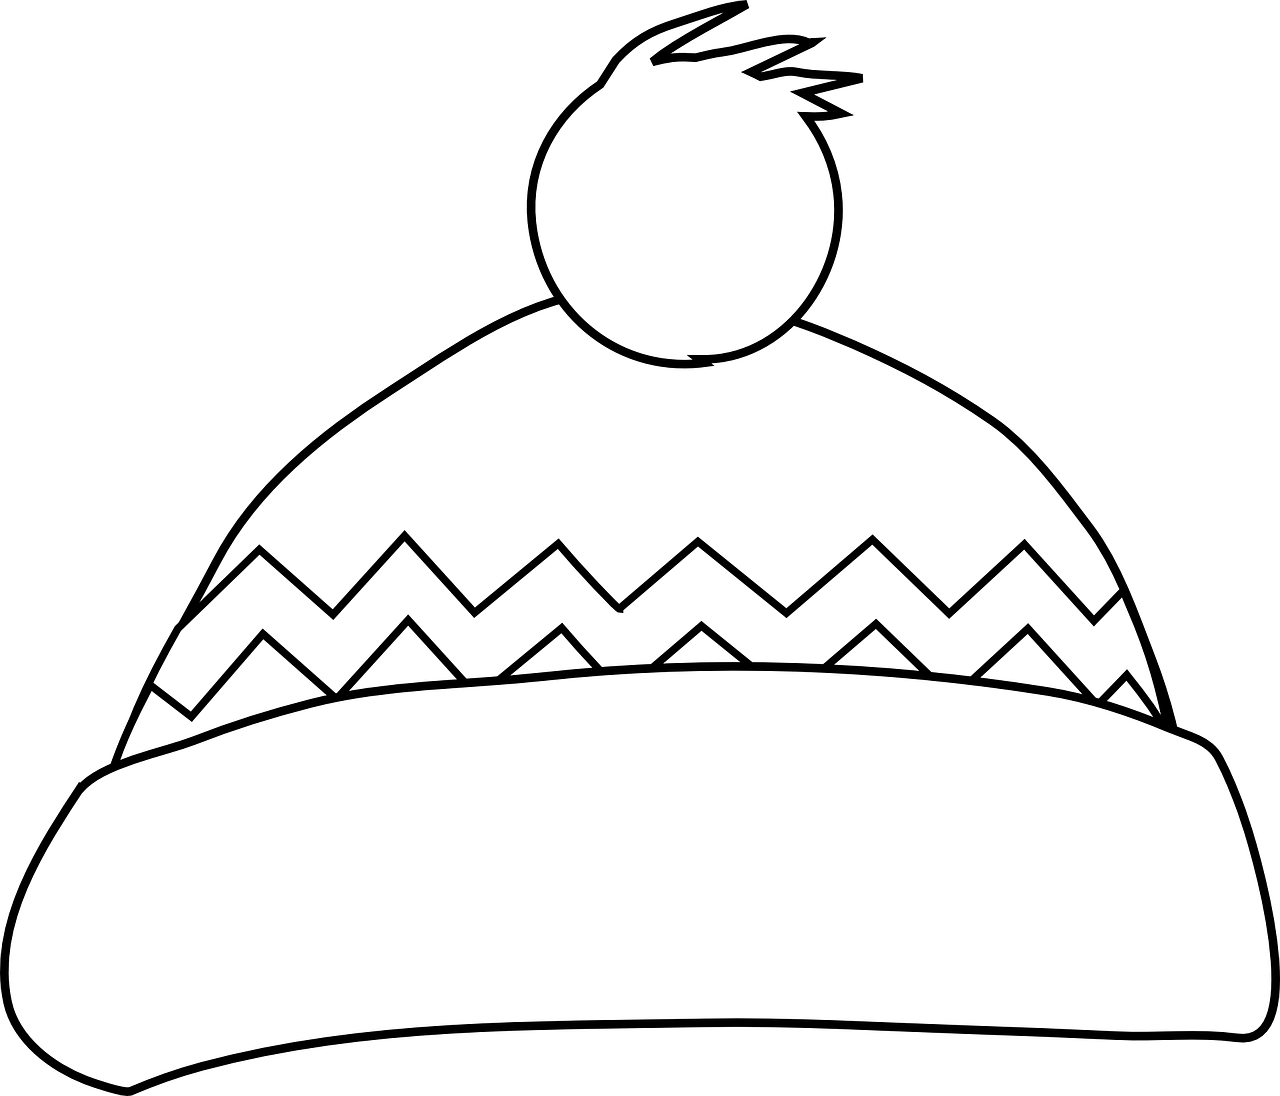 Glove clipart woolly hat. Winter clothing colouring pages